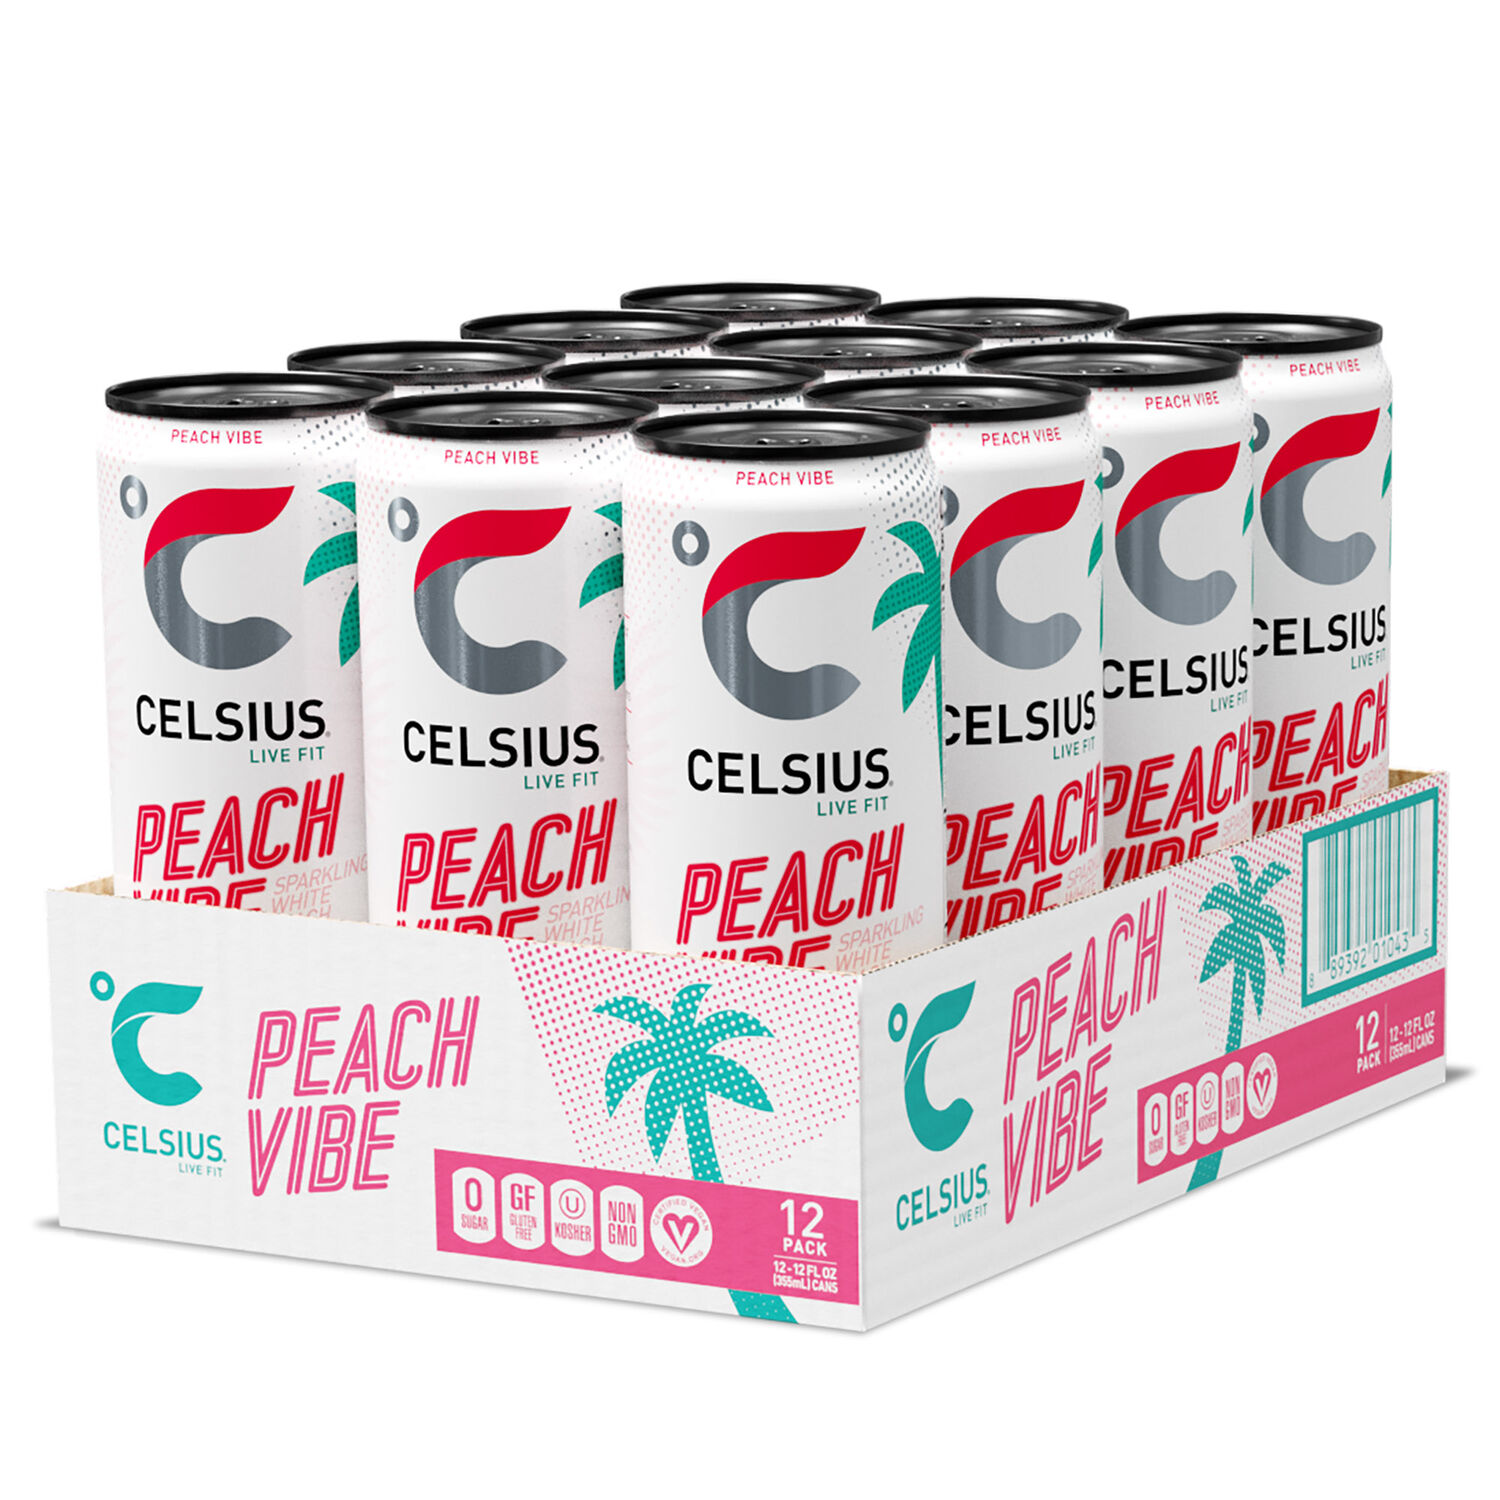 Celsius Sparkling Energy Drink Healthy - Peach Vibe Healthy - 12Oz. (12 Cans)